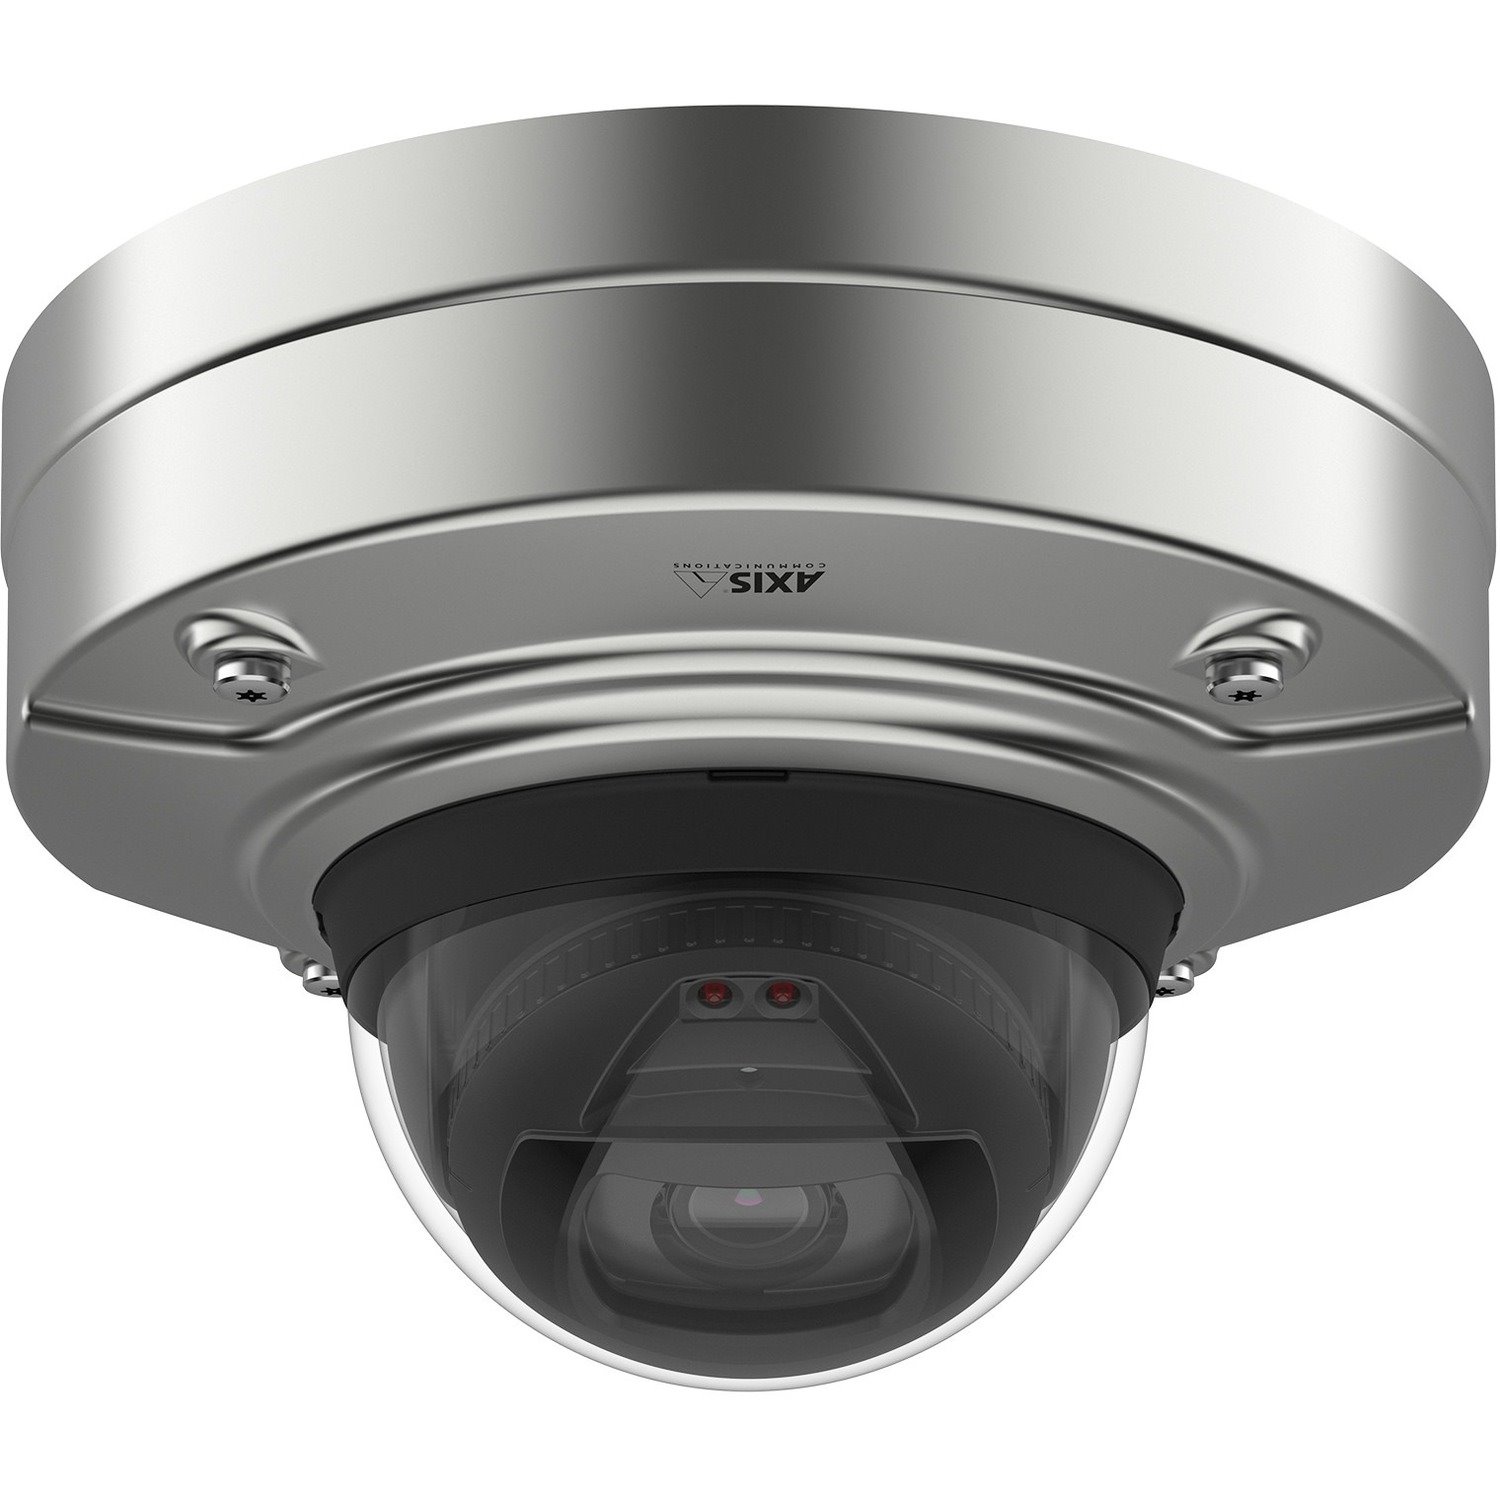 AXIS Q3517-SLVE 5 Megapixel Outdoor Network Camera - Colour - Dome